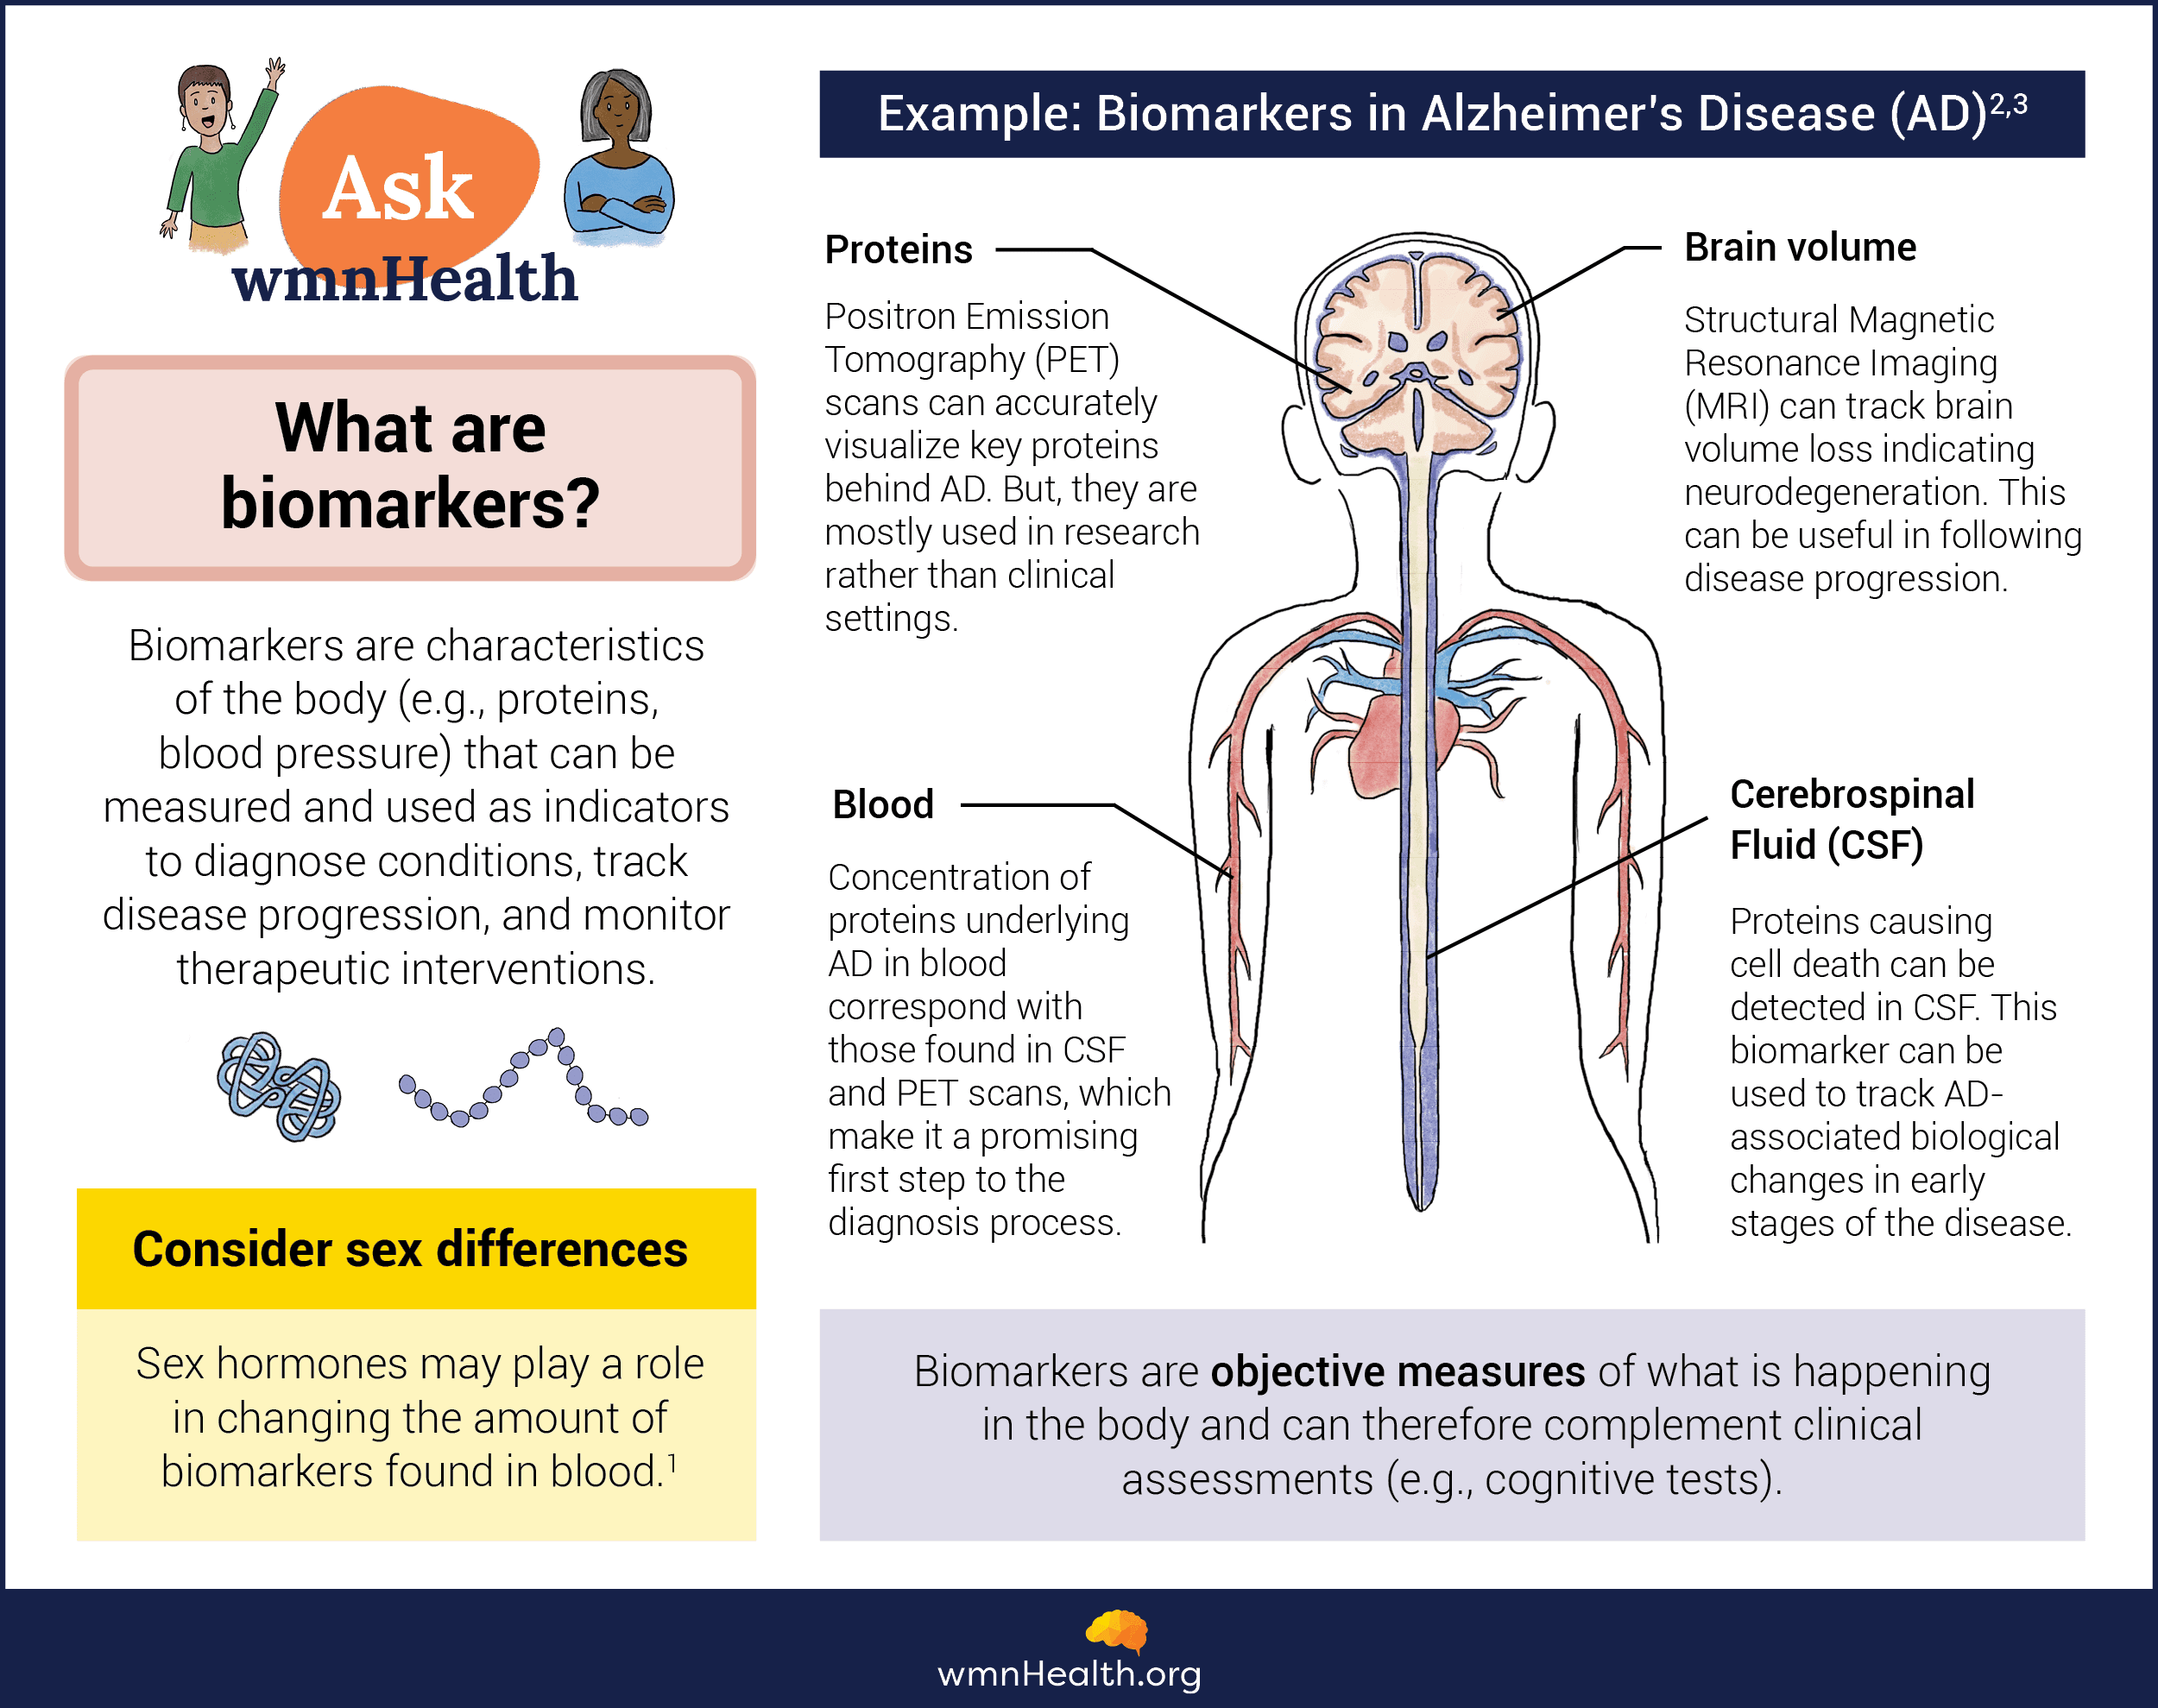 Infographic explaining what biomarkers are and how they are used in Alzheimer's